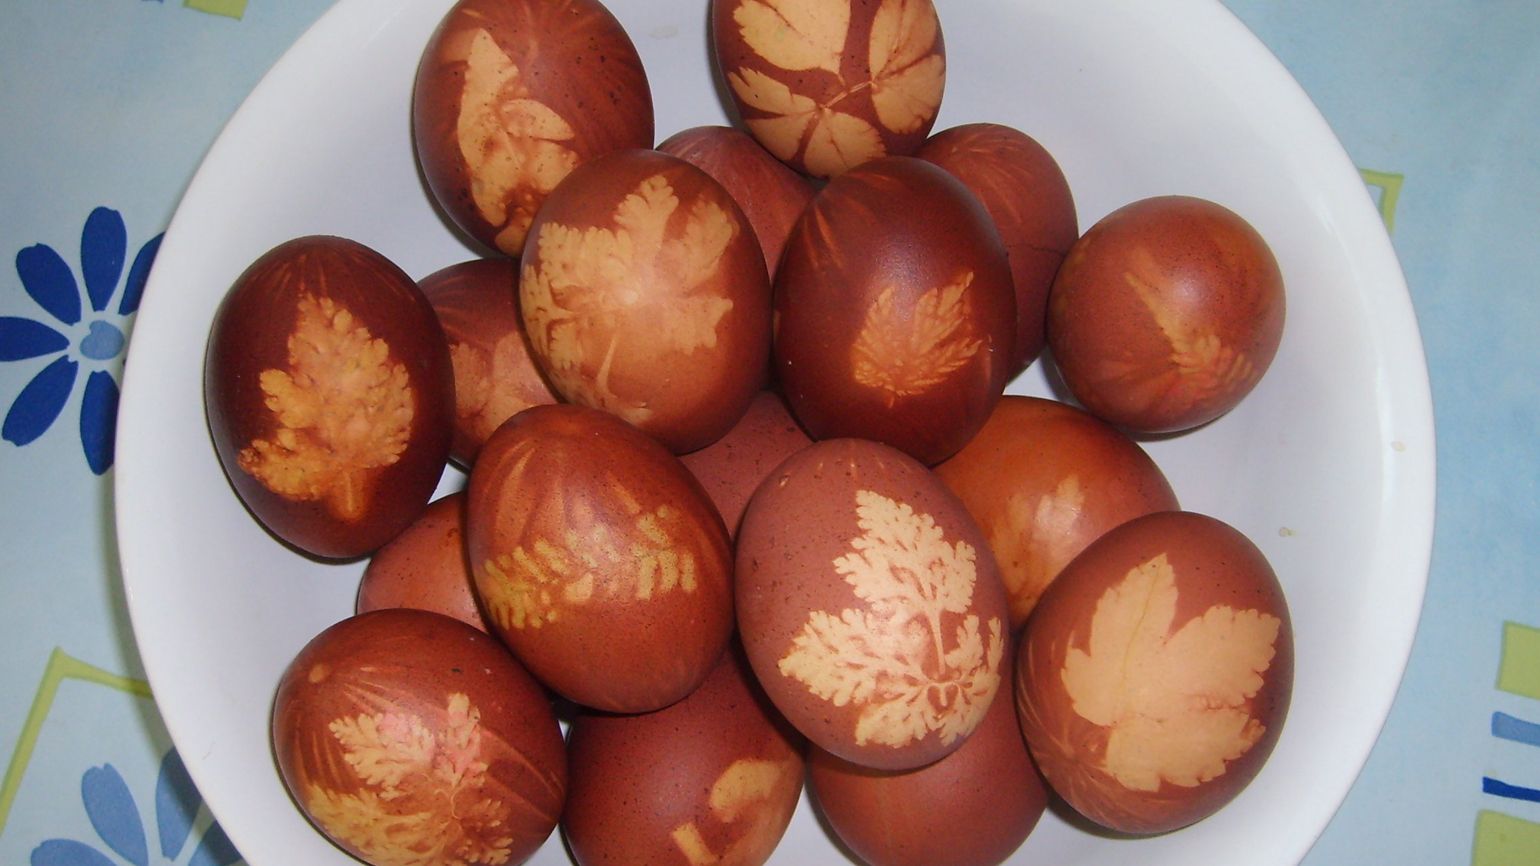 Brown dyed Easter eggs with leafy prints from Belgium